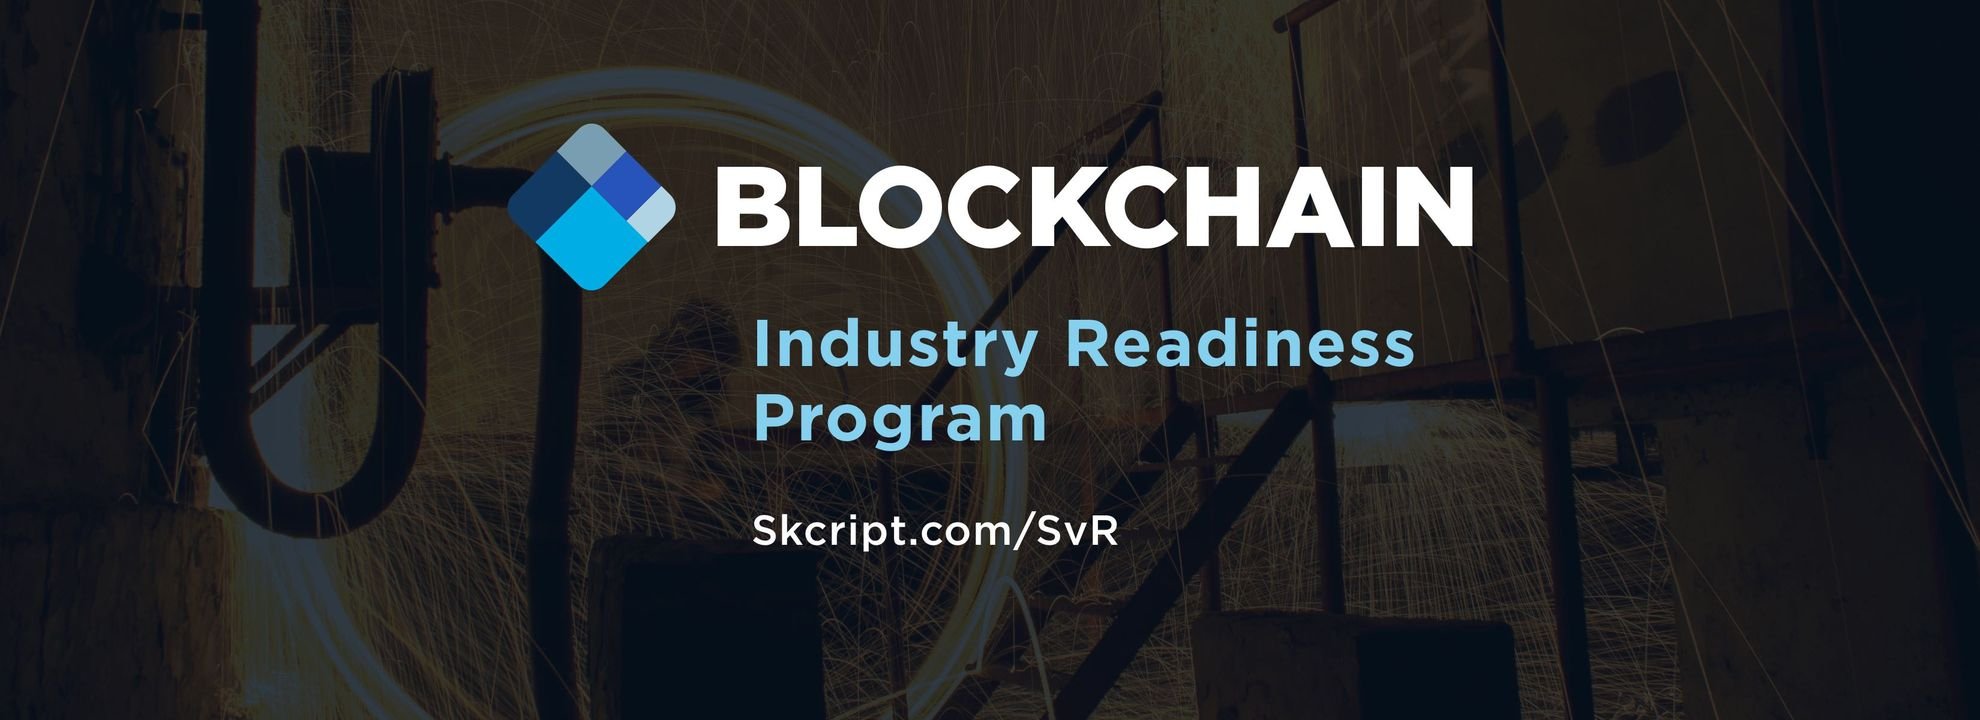 Introducing Blockchain Industry Readiness Programs (IRP)